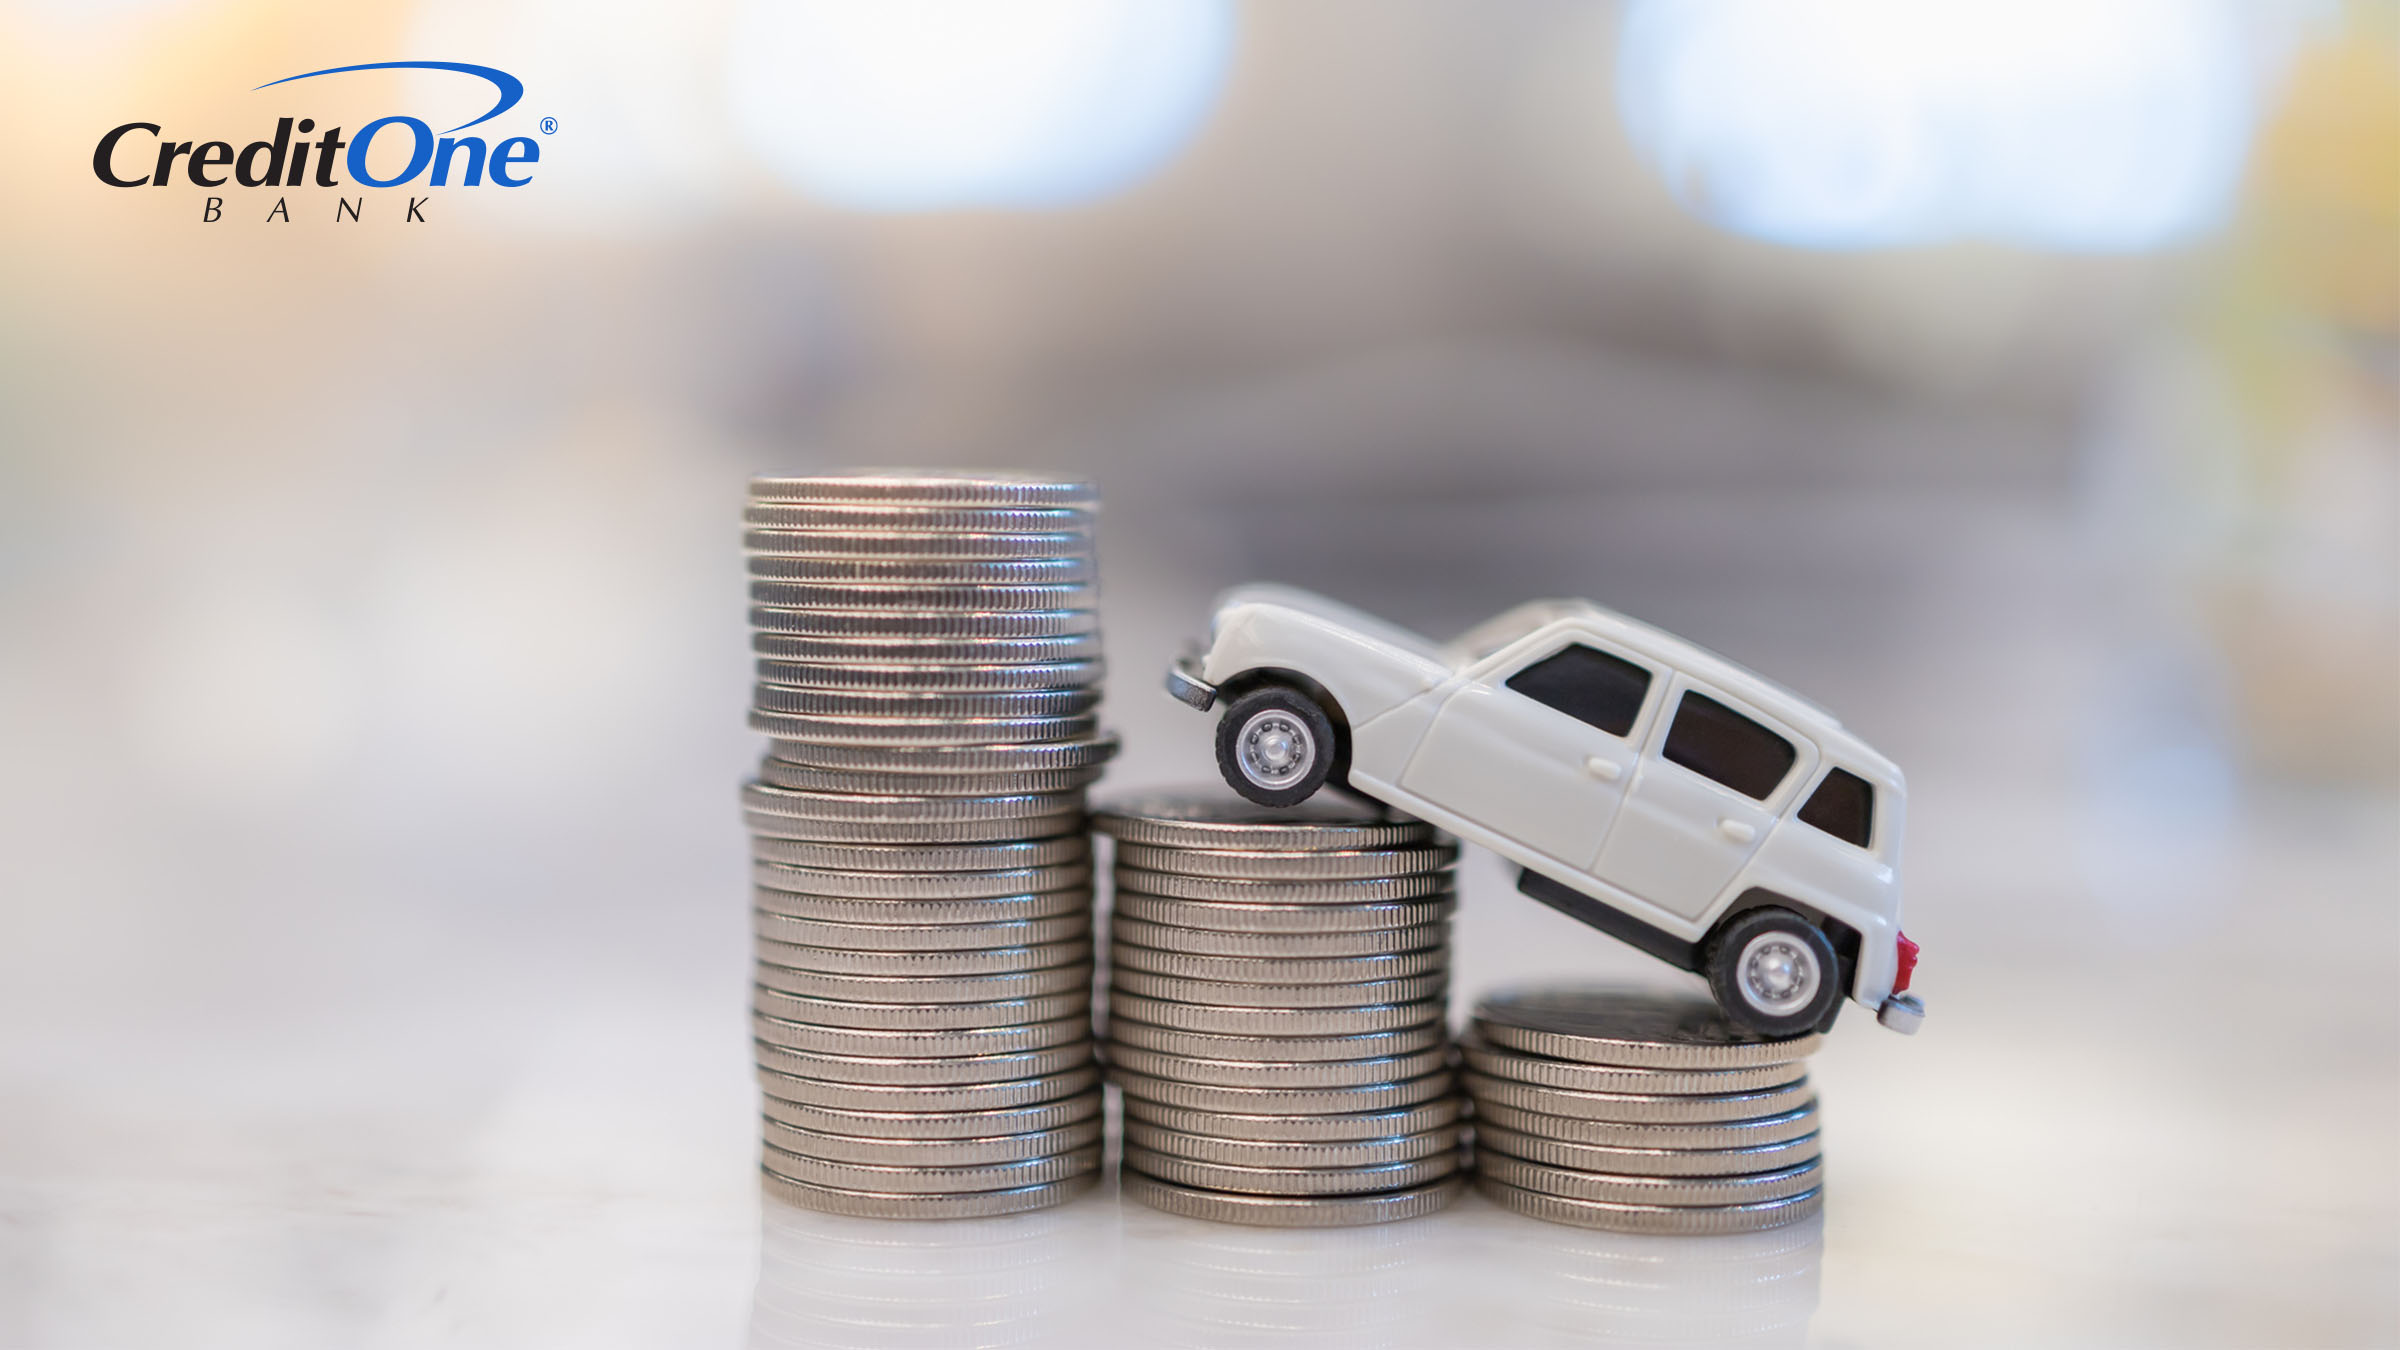 A toy car is climbing a stack of coins, representing auto insurance rates going up.